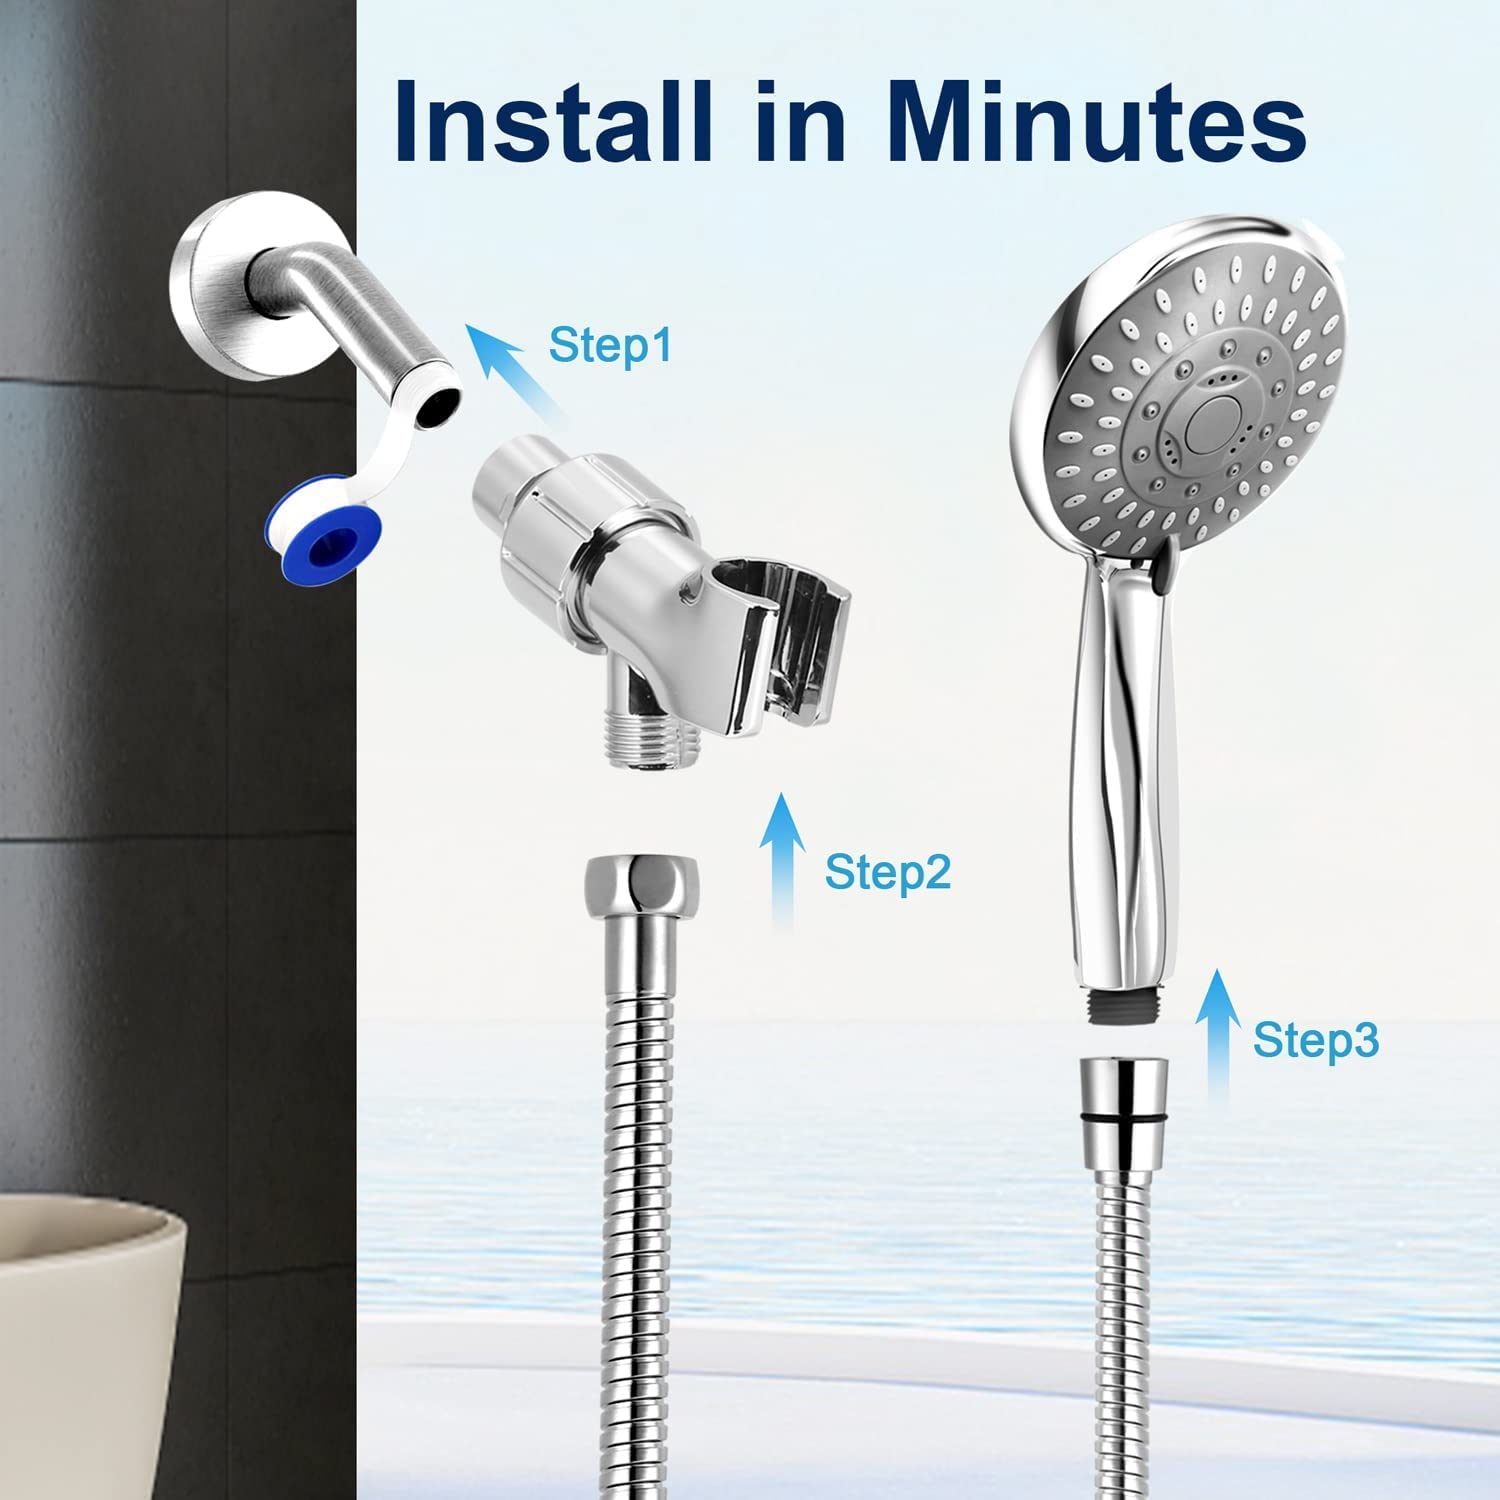 Filtered Shower Head High Pressure: INAVAMZ 5 Settings Shower Head with Filter For Hard Water Come with Bracket 59